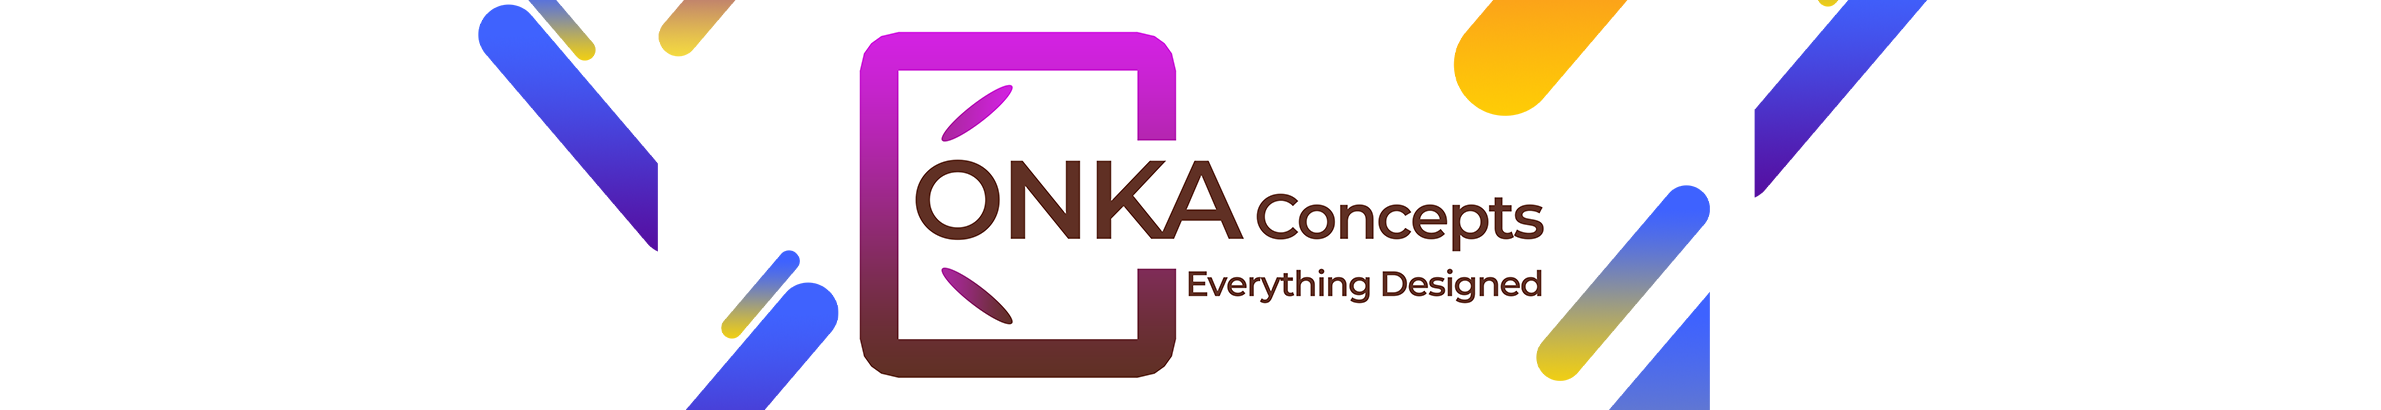 ONKA CONCEPTS's profile banner